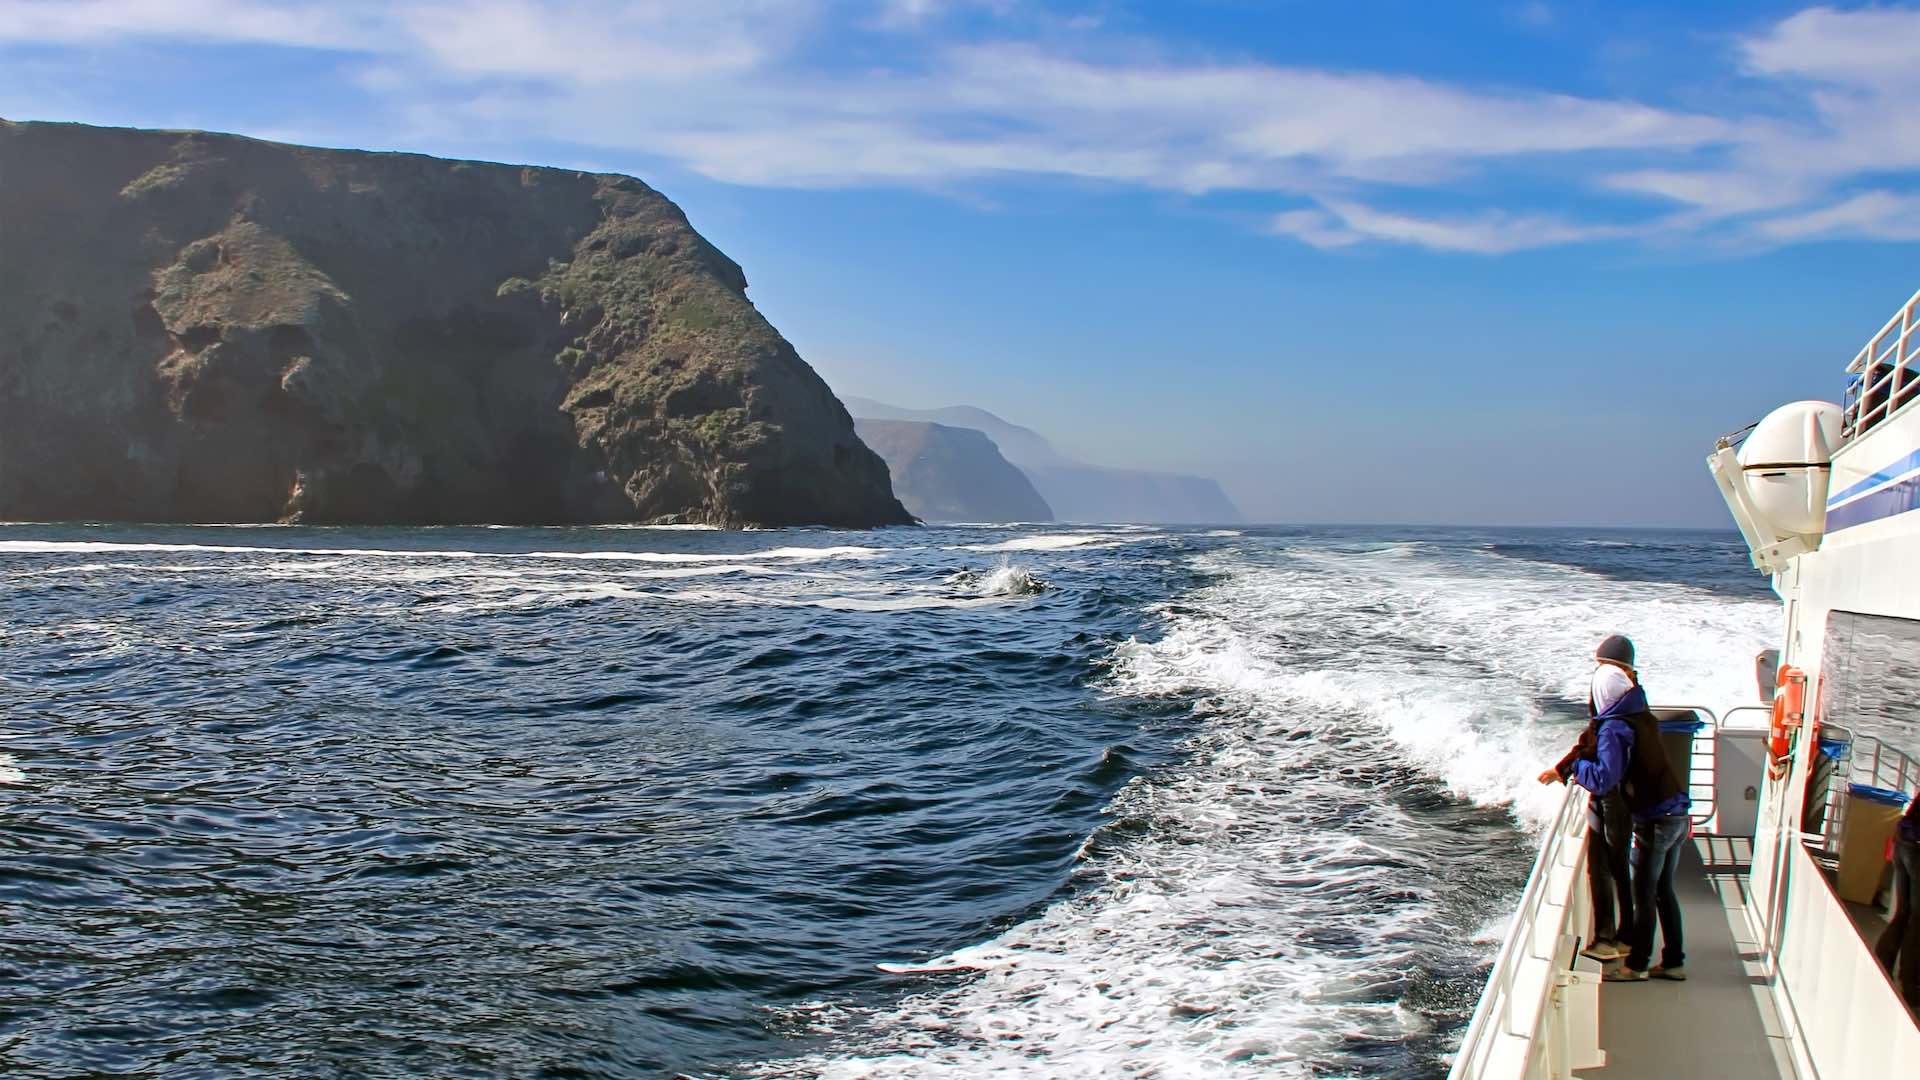 Visitors to Santa Barbara often take day trips by boat to California's Channel Islands National Park.